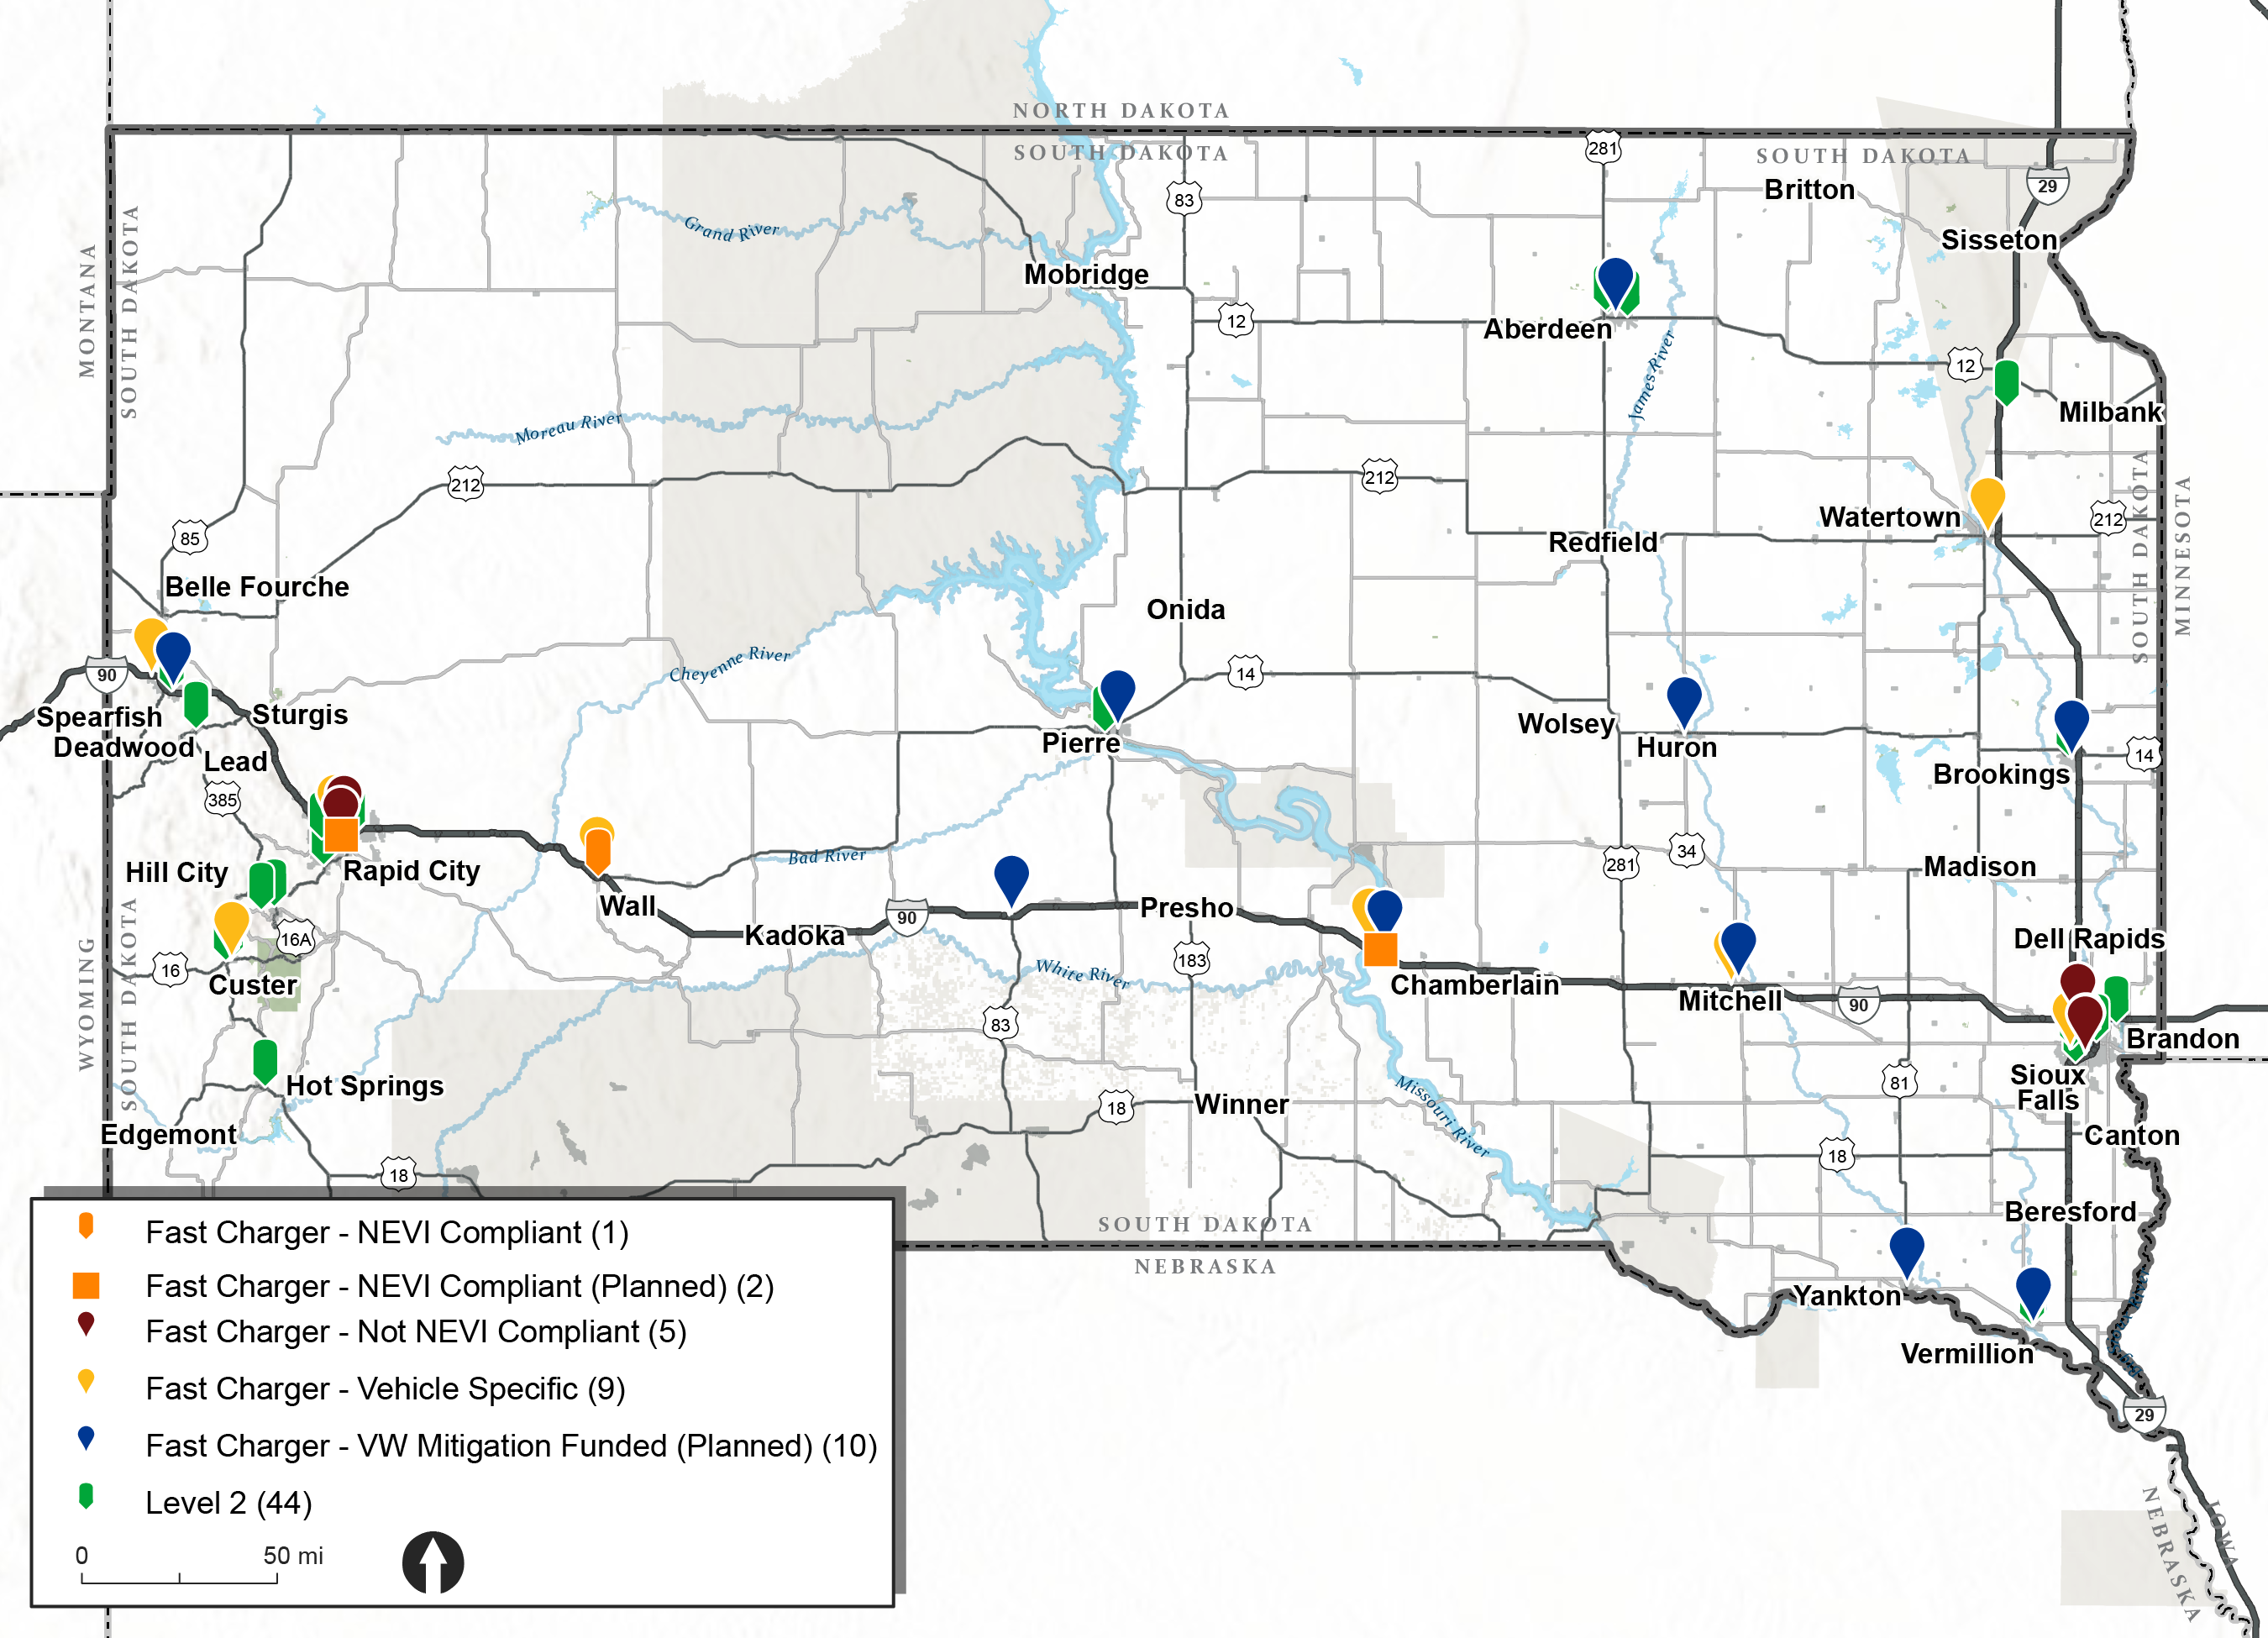 Map showing location of different types of fast chargers throughout the state. Most are located along I-90 and other major highways.